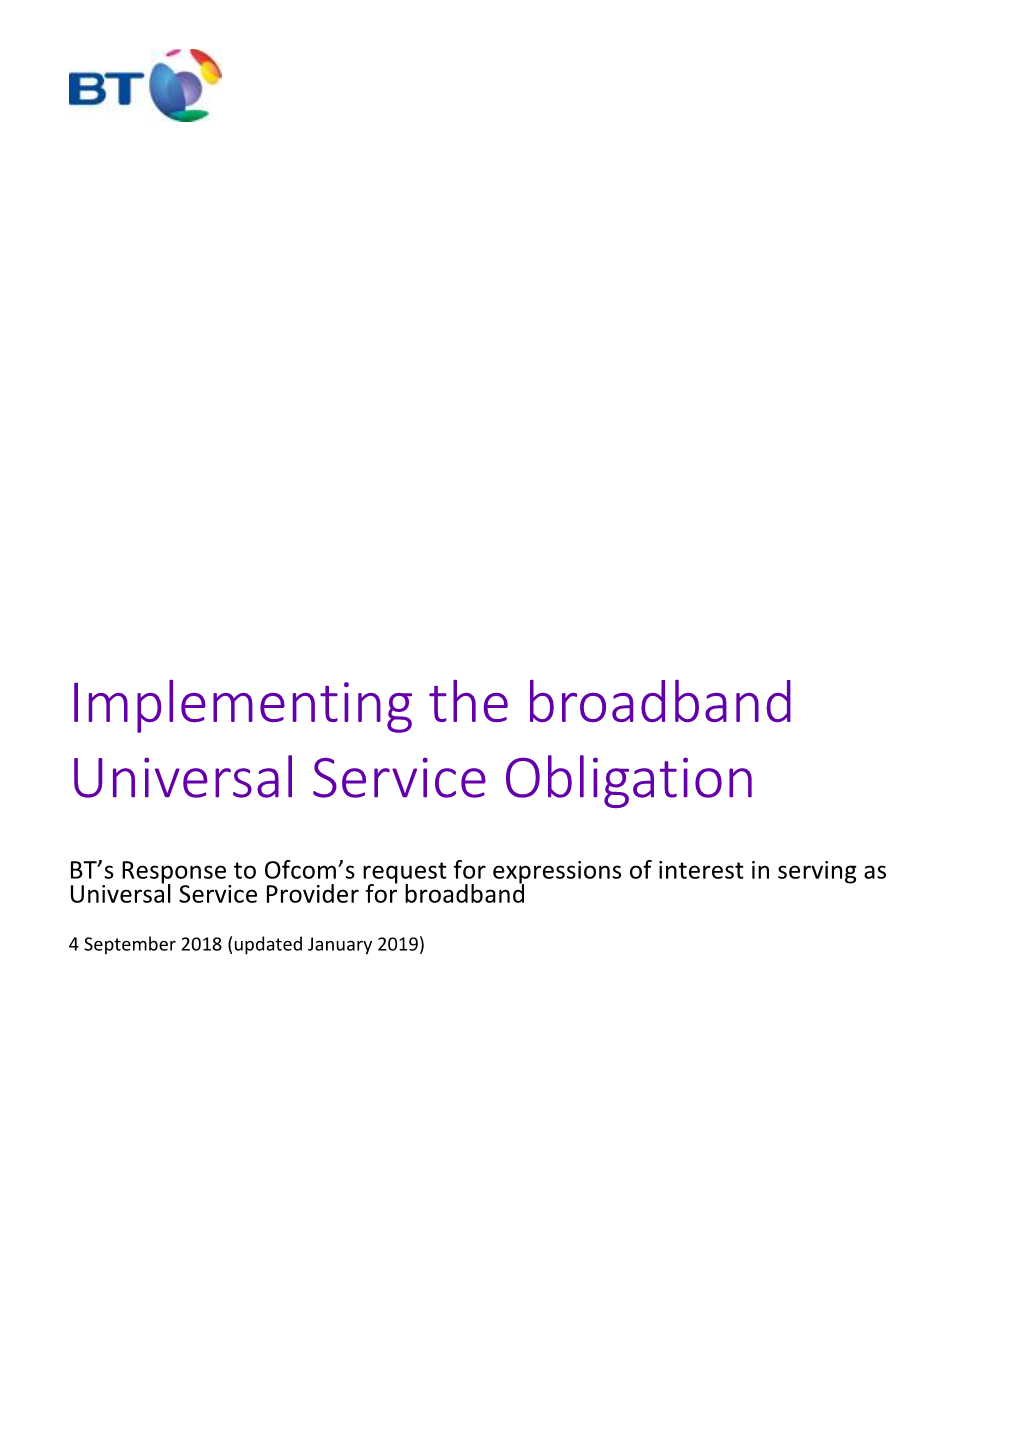 BT’S Response to Ofcom’S Request for Expressions of Interest in Serving As Universal Service Provider for Broadband